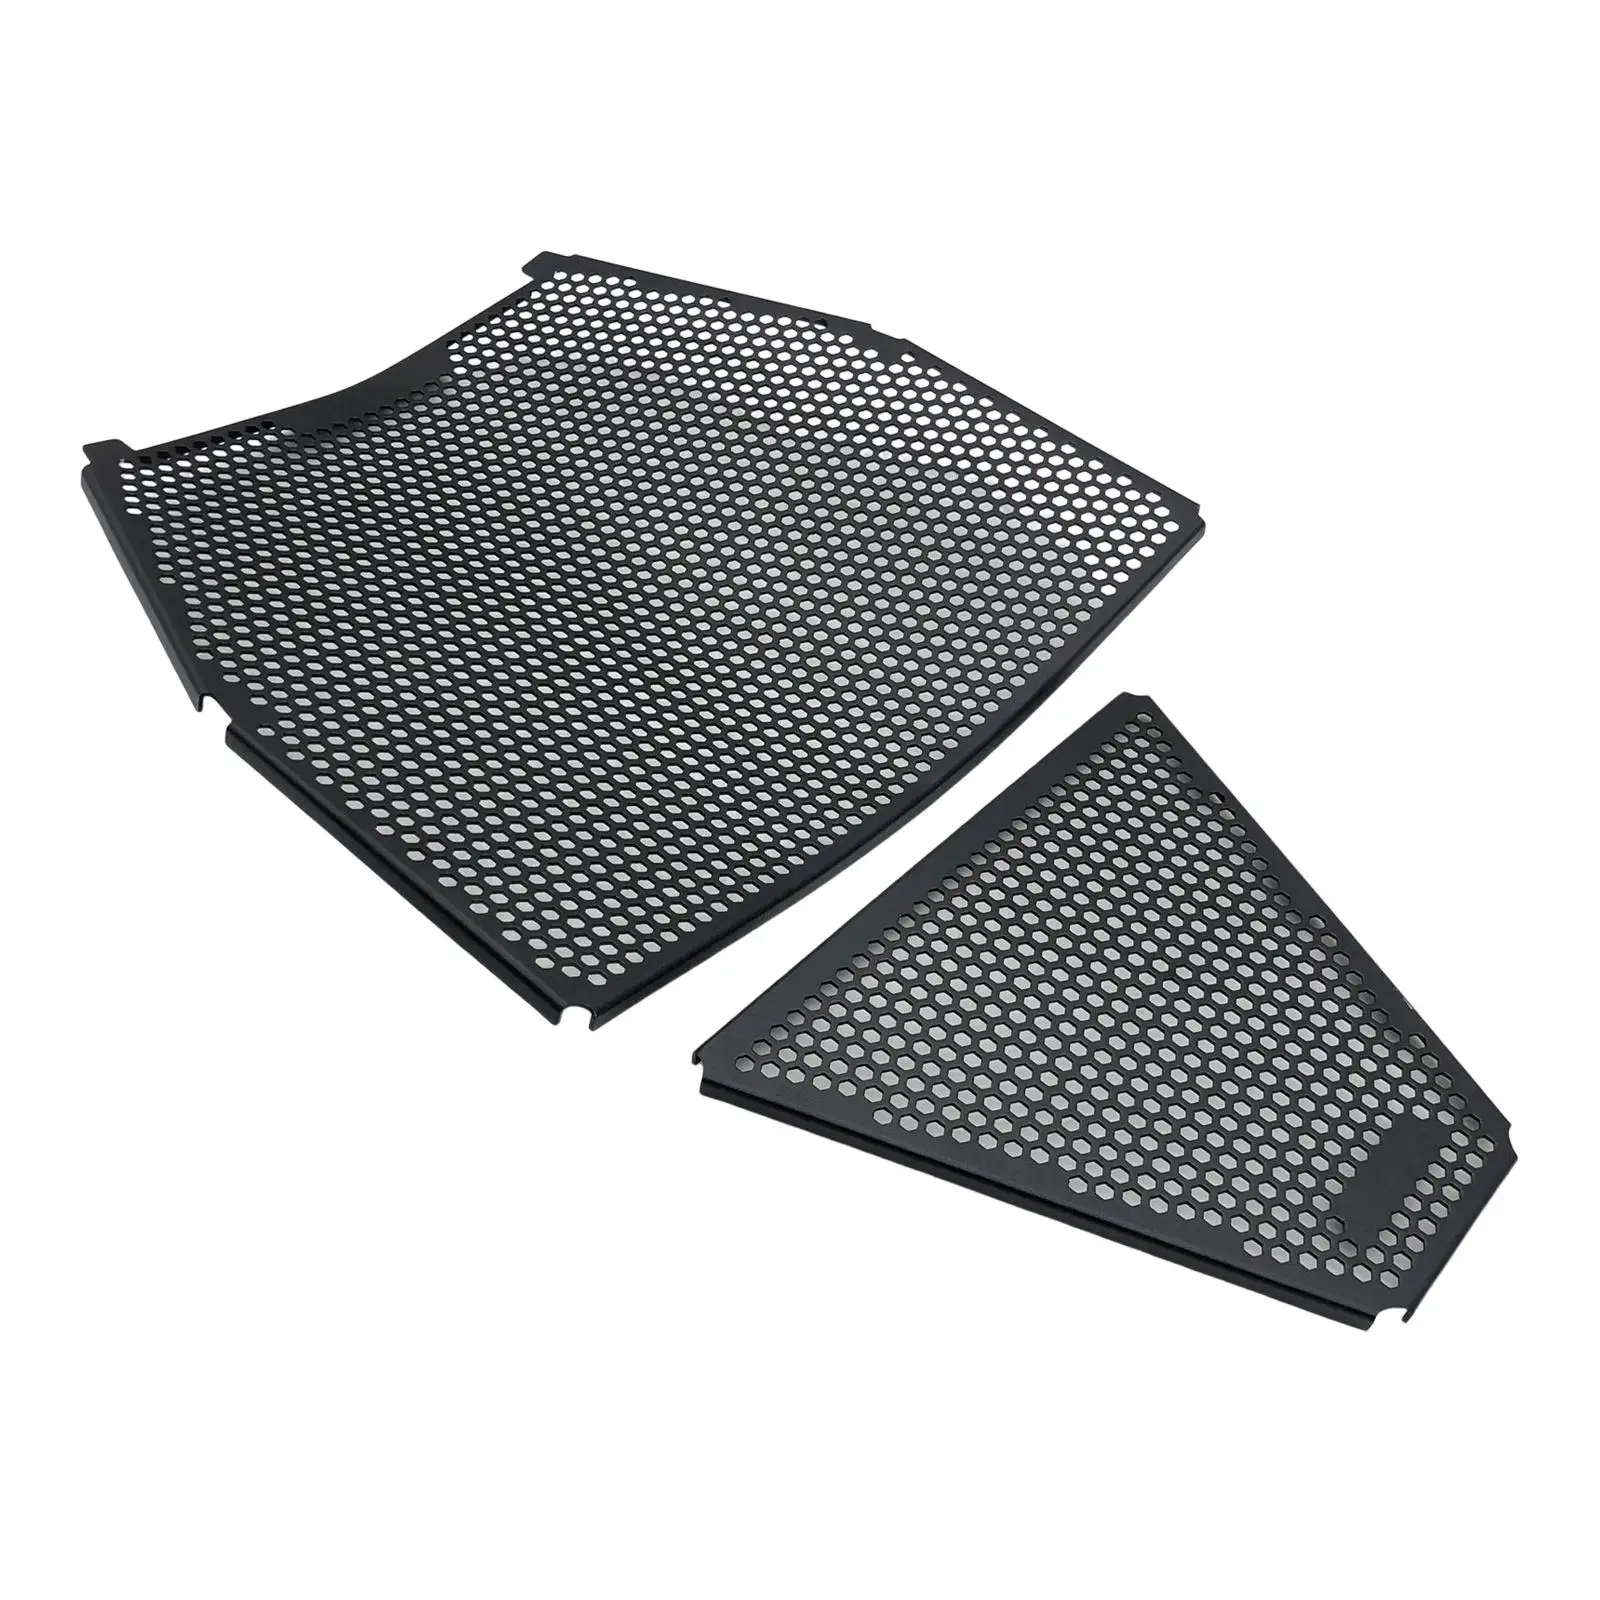 Motorcycle Radiator Grille Replaces Easy to Install High Performance Durable Protective Cover Accessories for V4